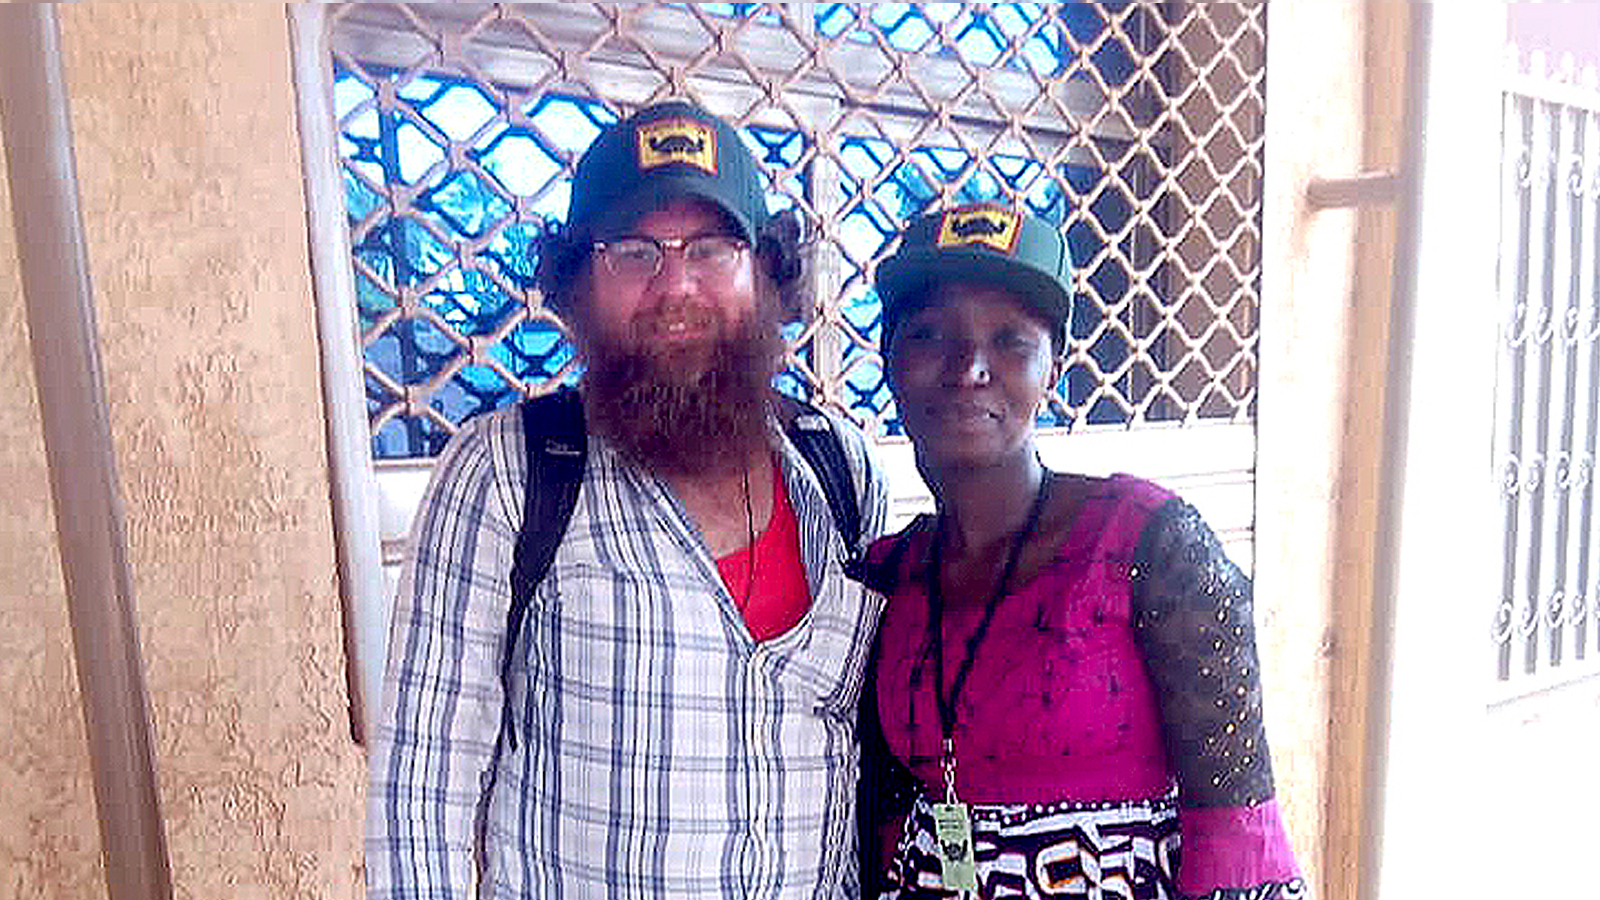 Kevin Fridy and one of his research team members in Burkina Faso